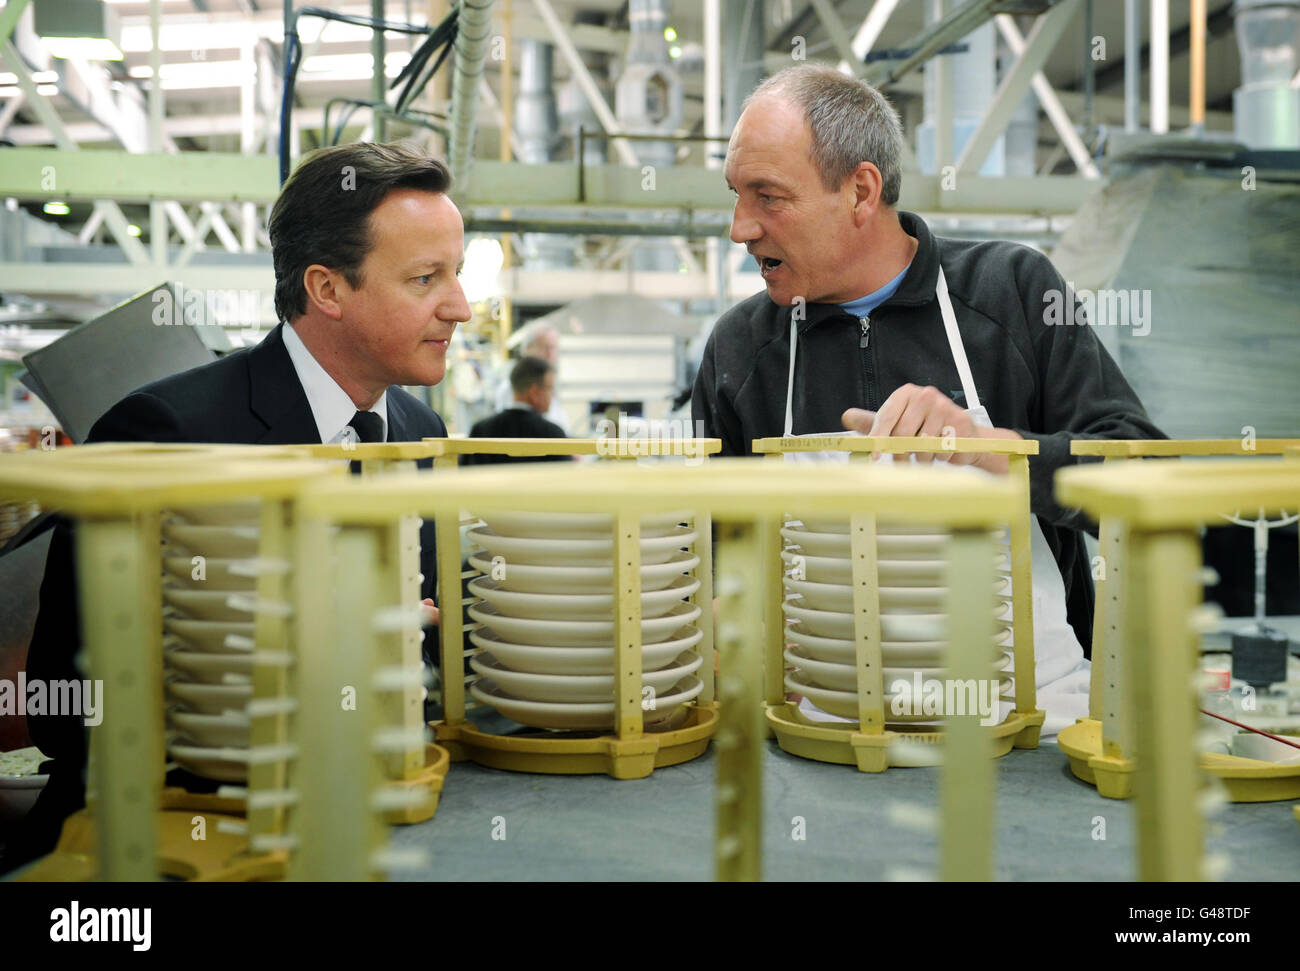 Prime Minister David Cameron meets staff as he tours the Portmeirion Potteries in Stoke-on-Trent today. Later he will make a speech in St Asaph in north Wales. Stock Photo